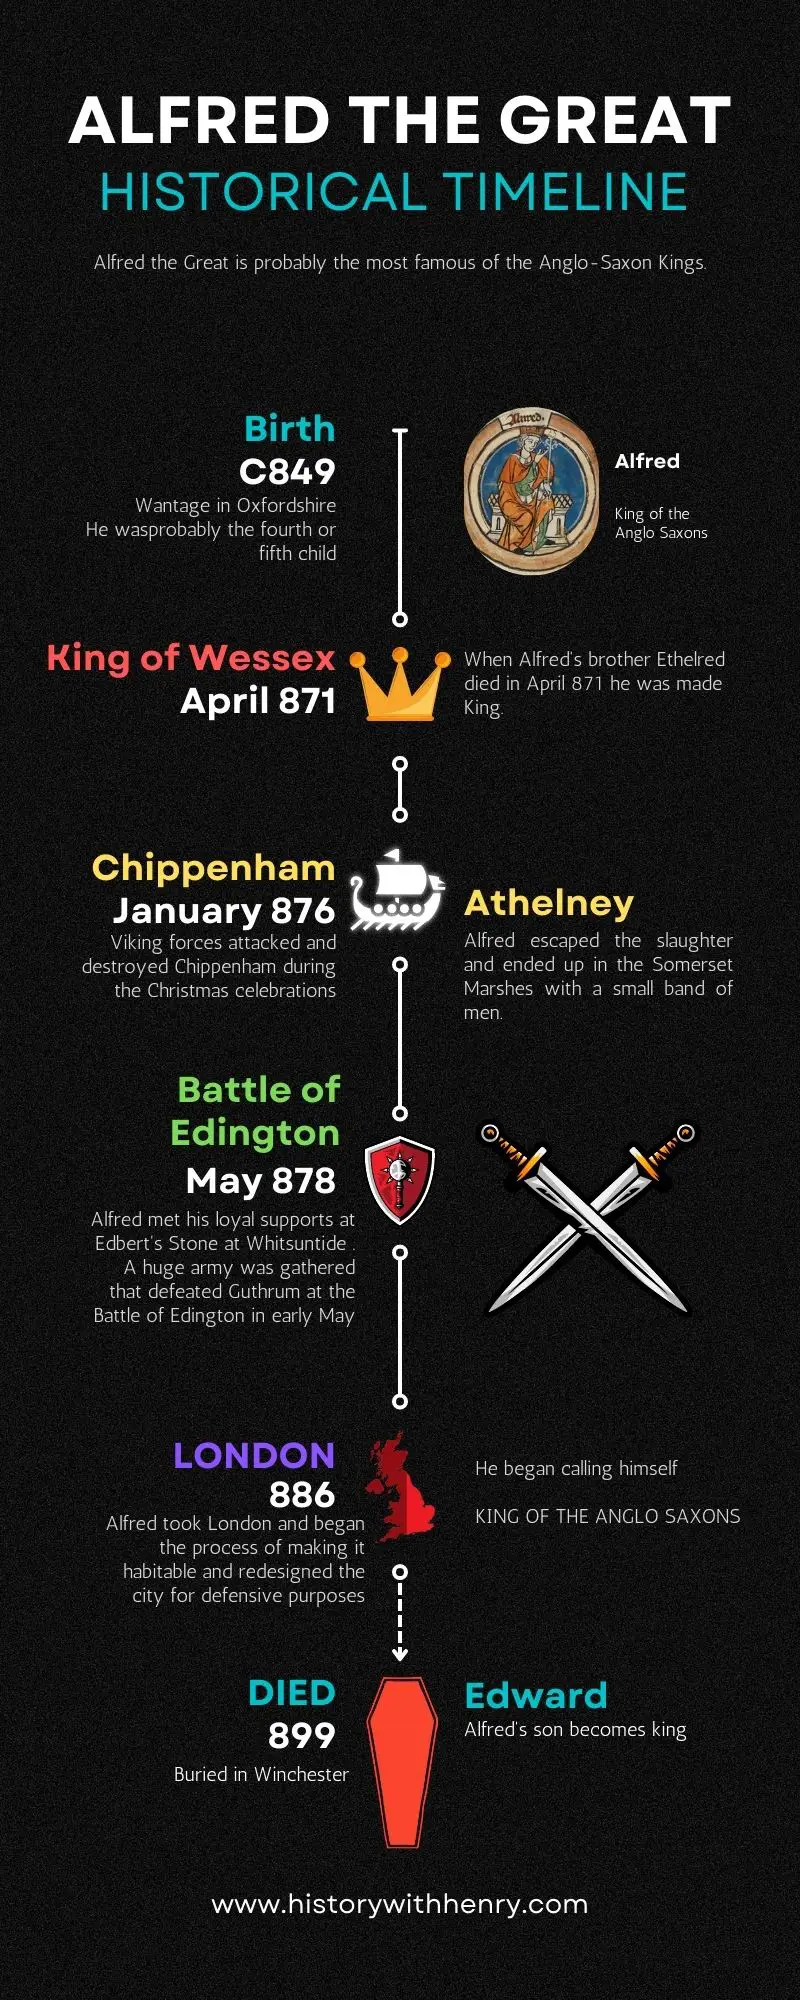 Alfred the Great Timeline